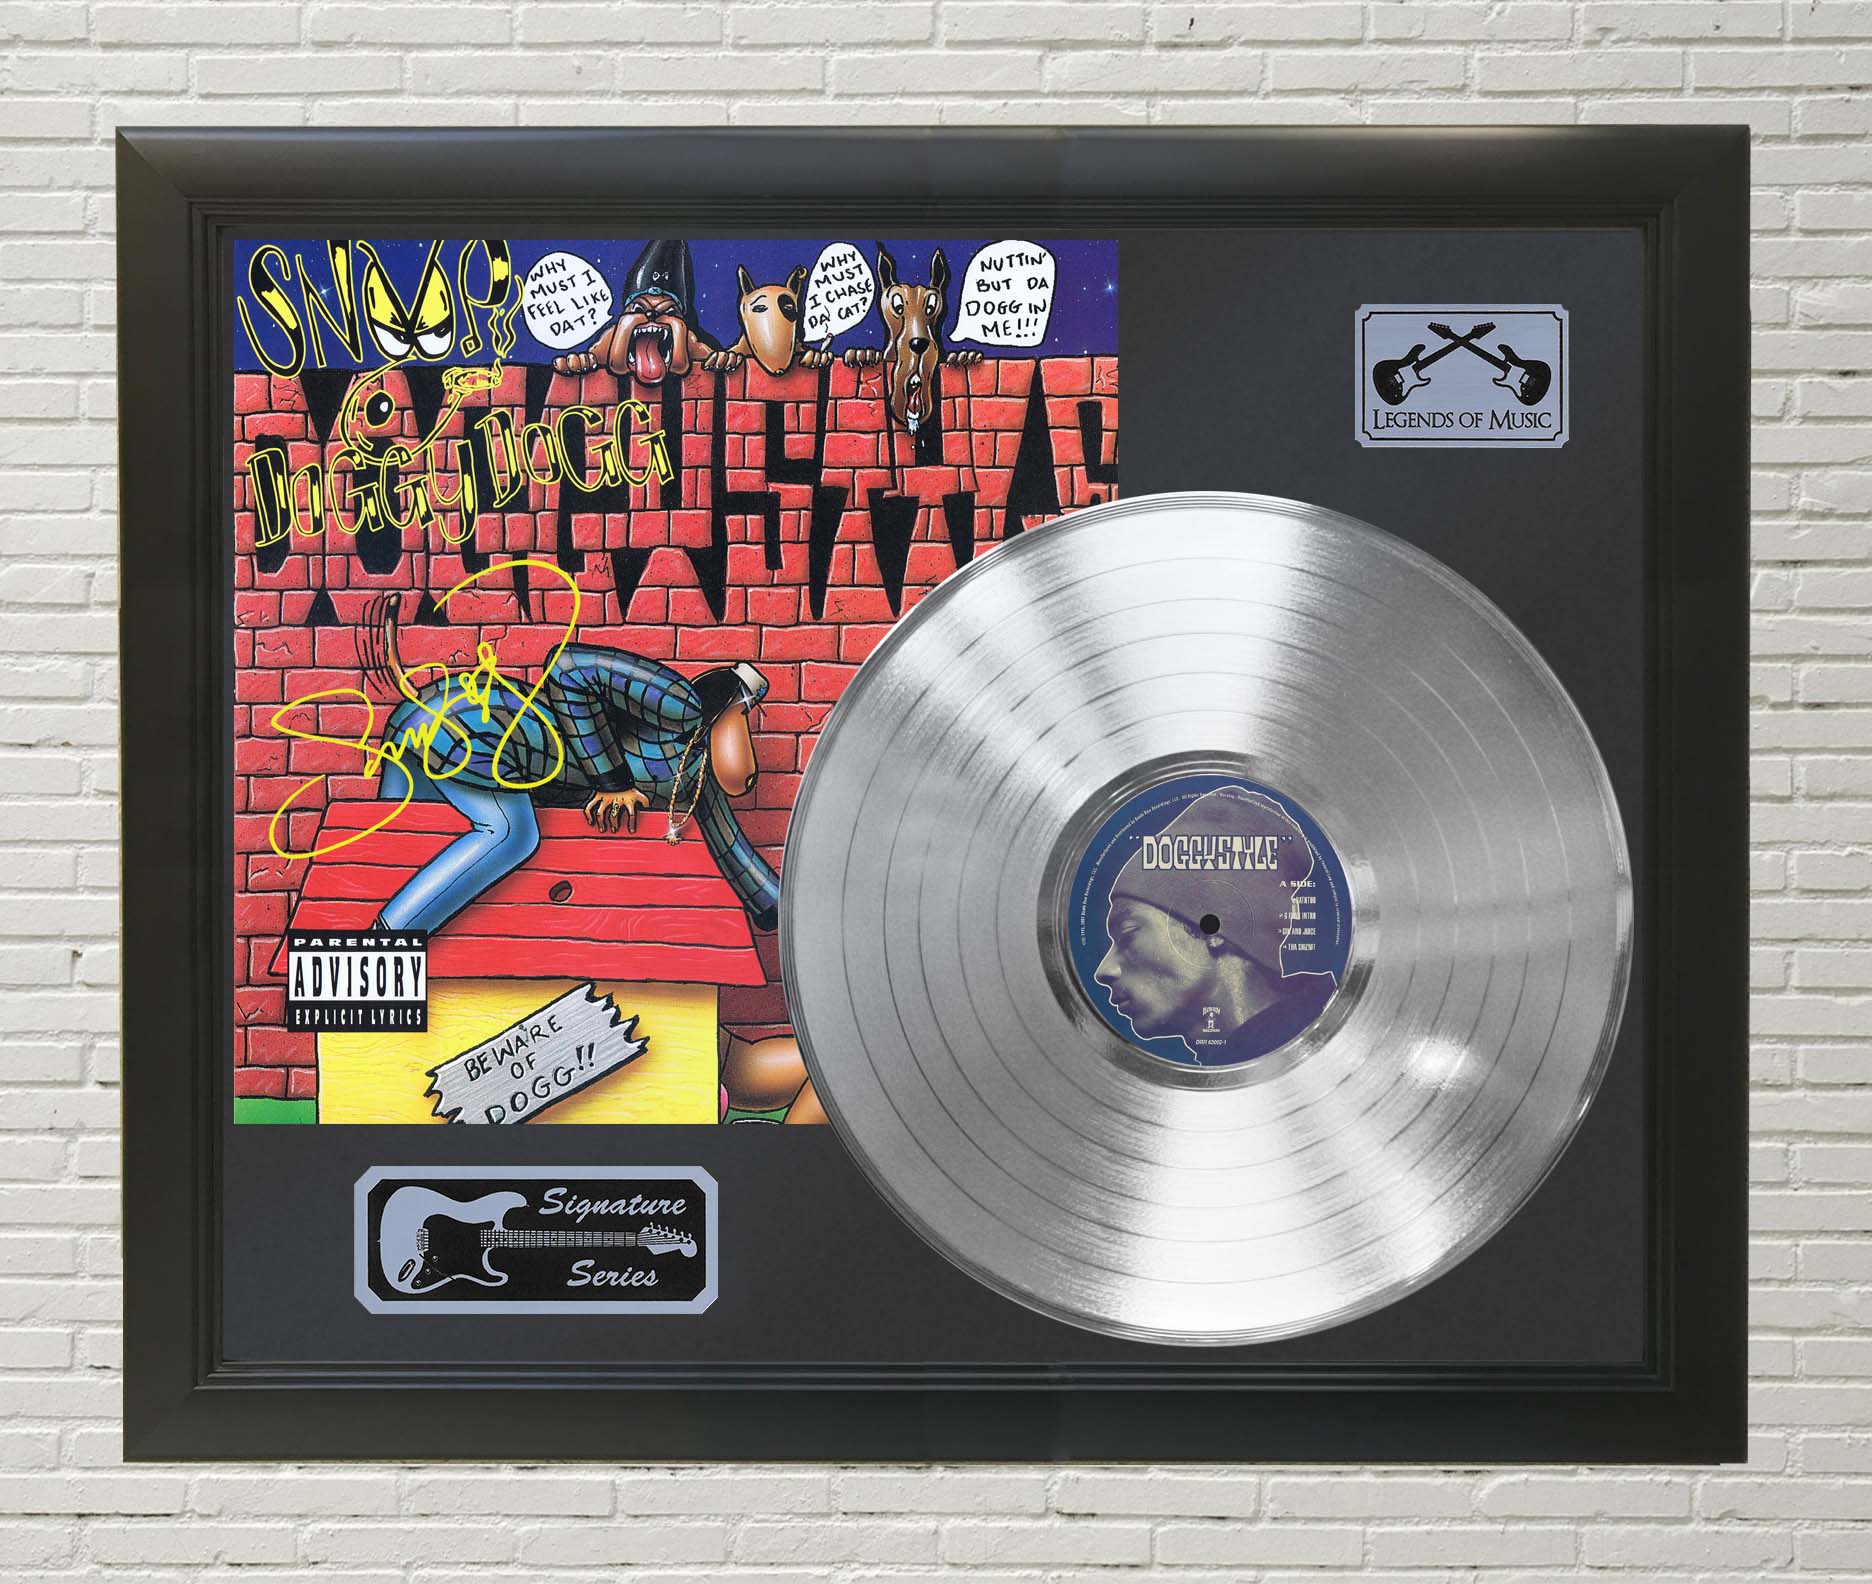 Snoop - Doggie Style Platinum LP Record Framed Signature Display M4 - Gold Record Outlet Album and Disc Collectible Memorabilia